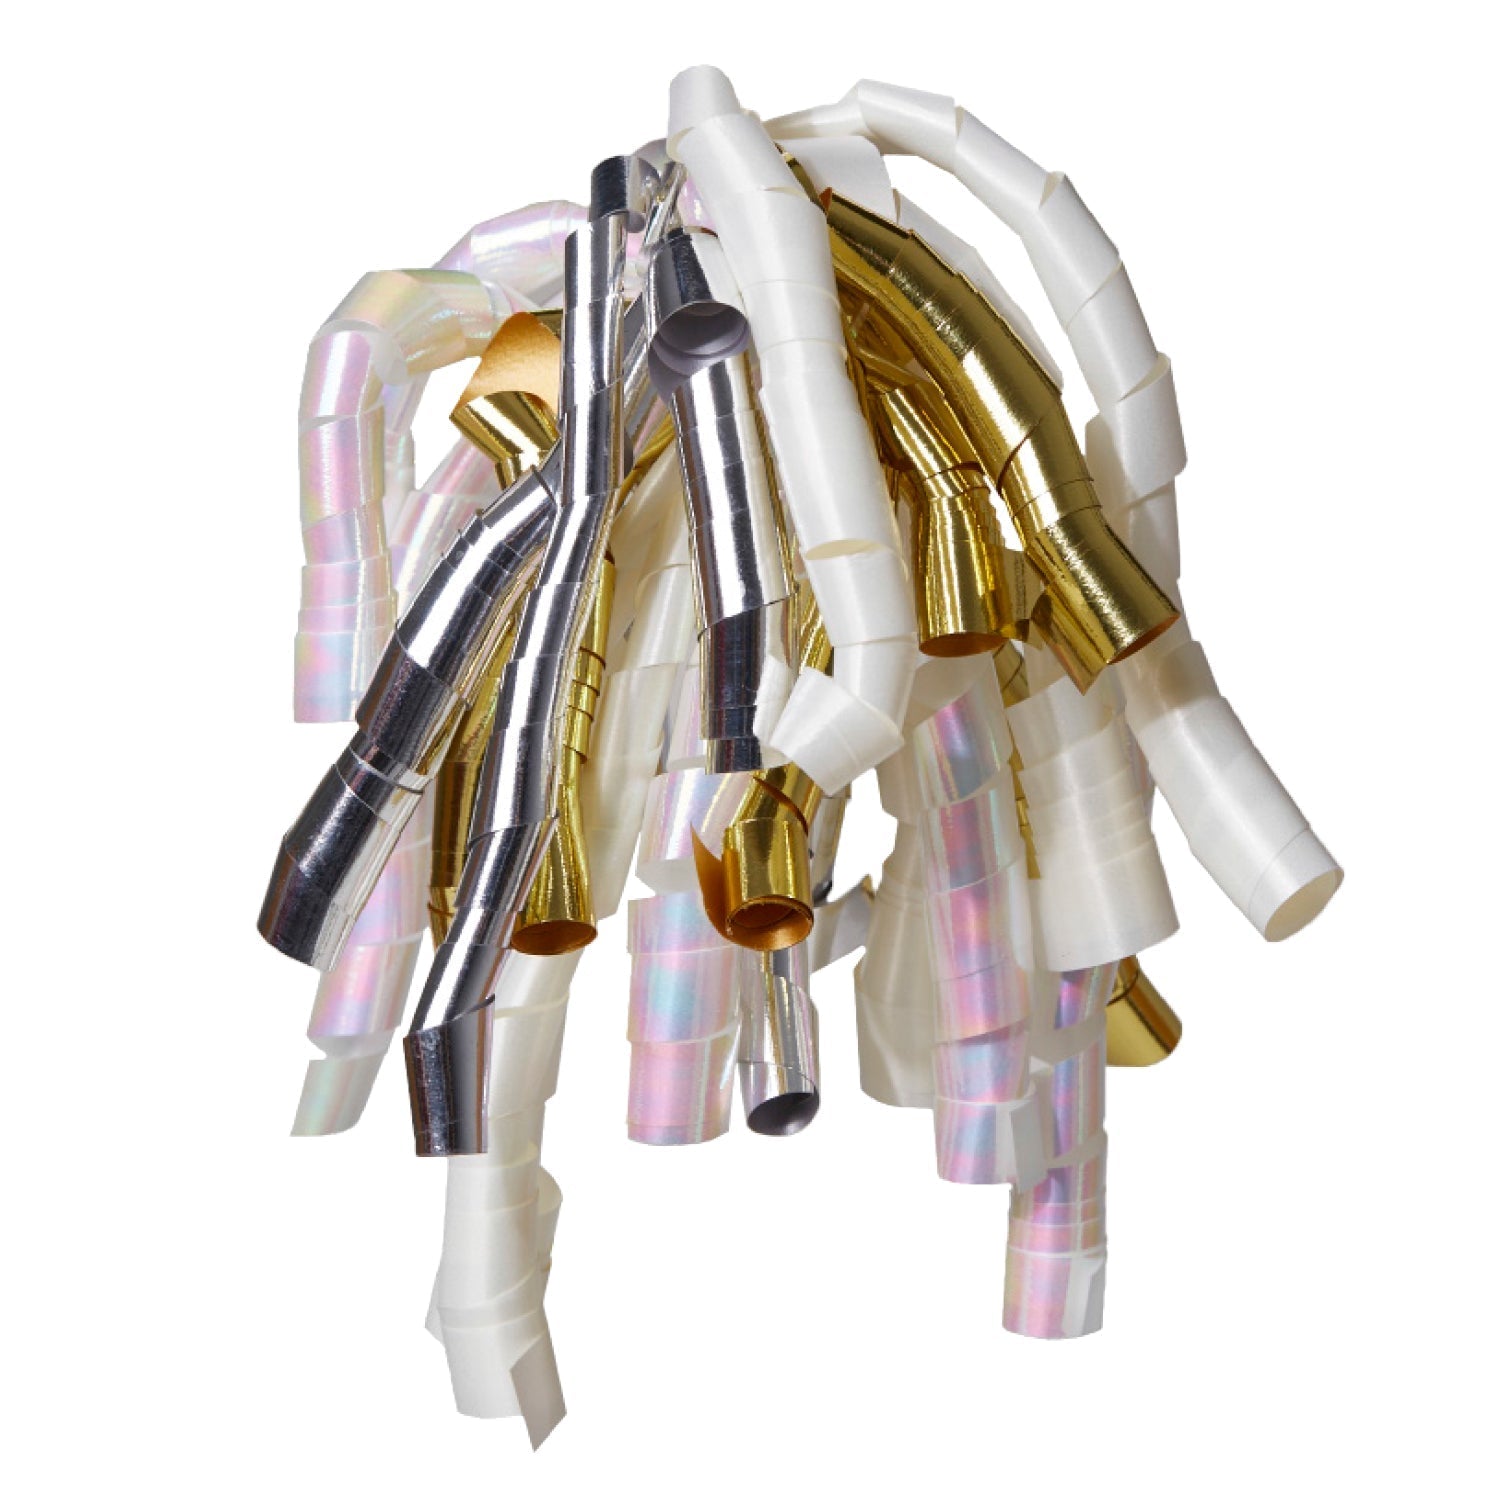 All-Occasion Poly Metallic Curly Bow Bundle, 9-Count